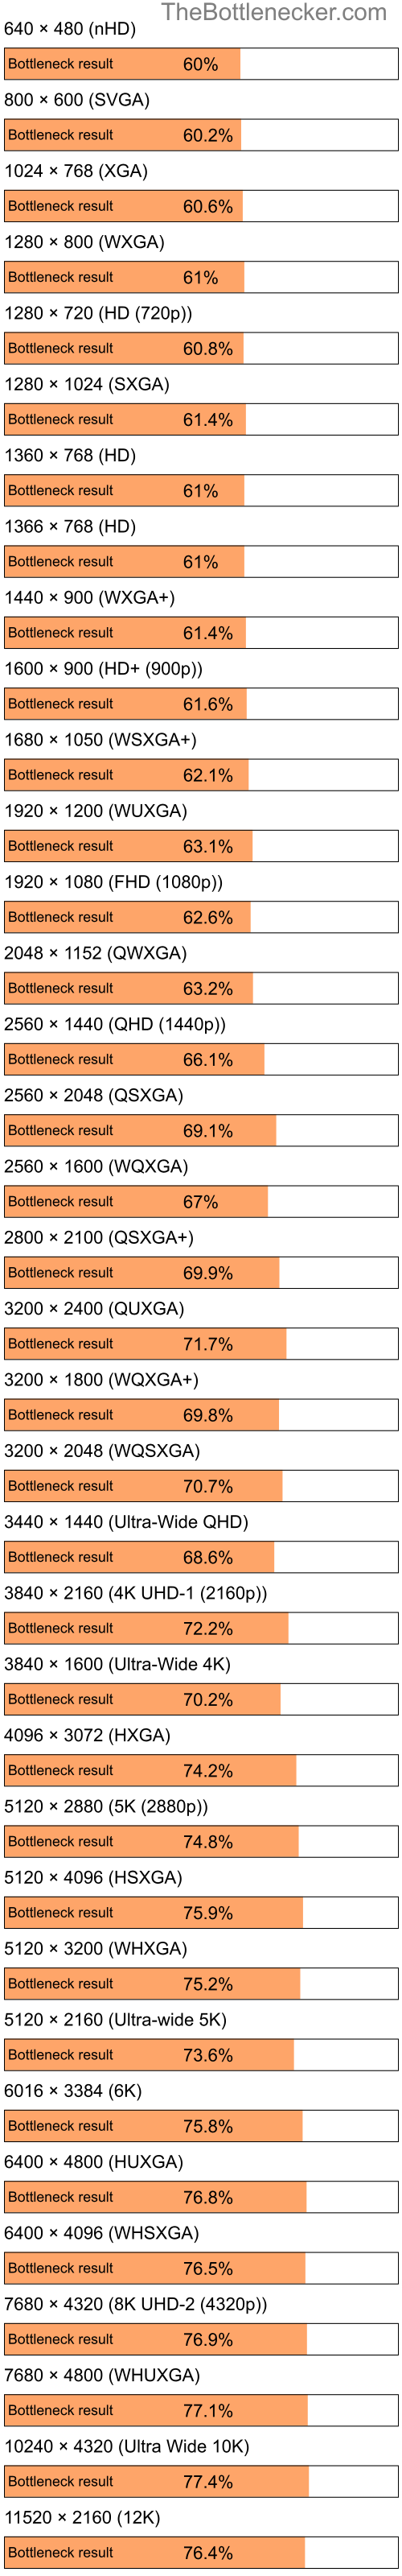 Bottleneck results by resolution for Intel Atom Z520 and AMD Mobility Radeon X700 in Processor Intense Tasks